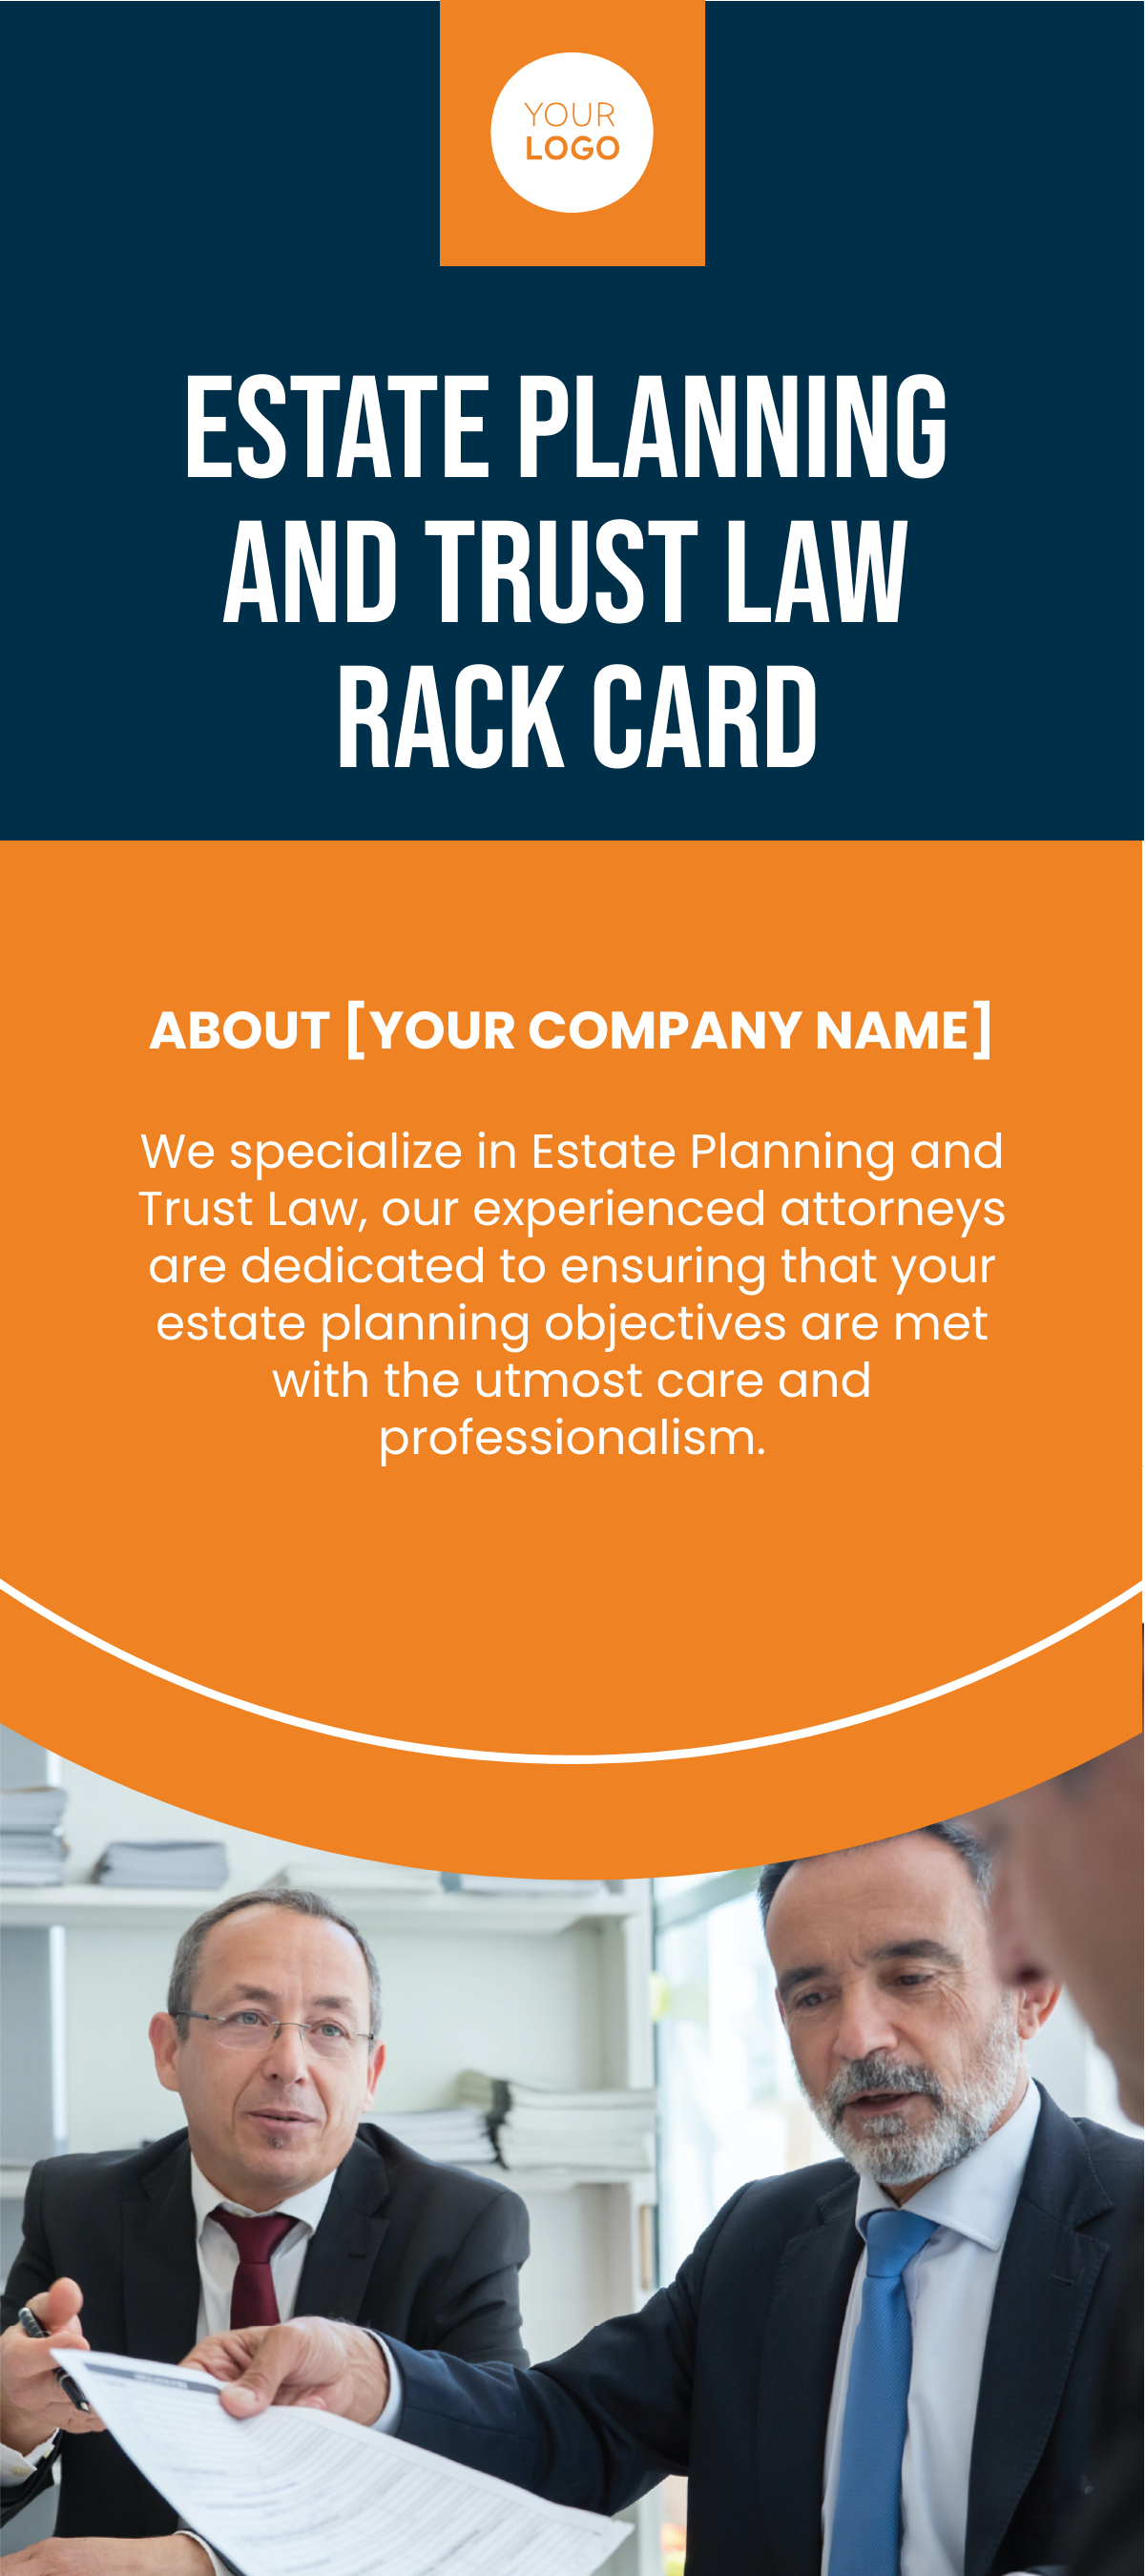 Estate Planning and Trust Law Rack Card